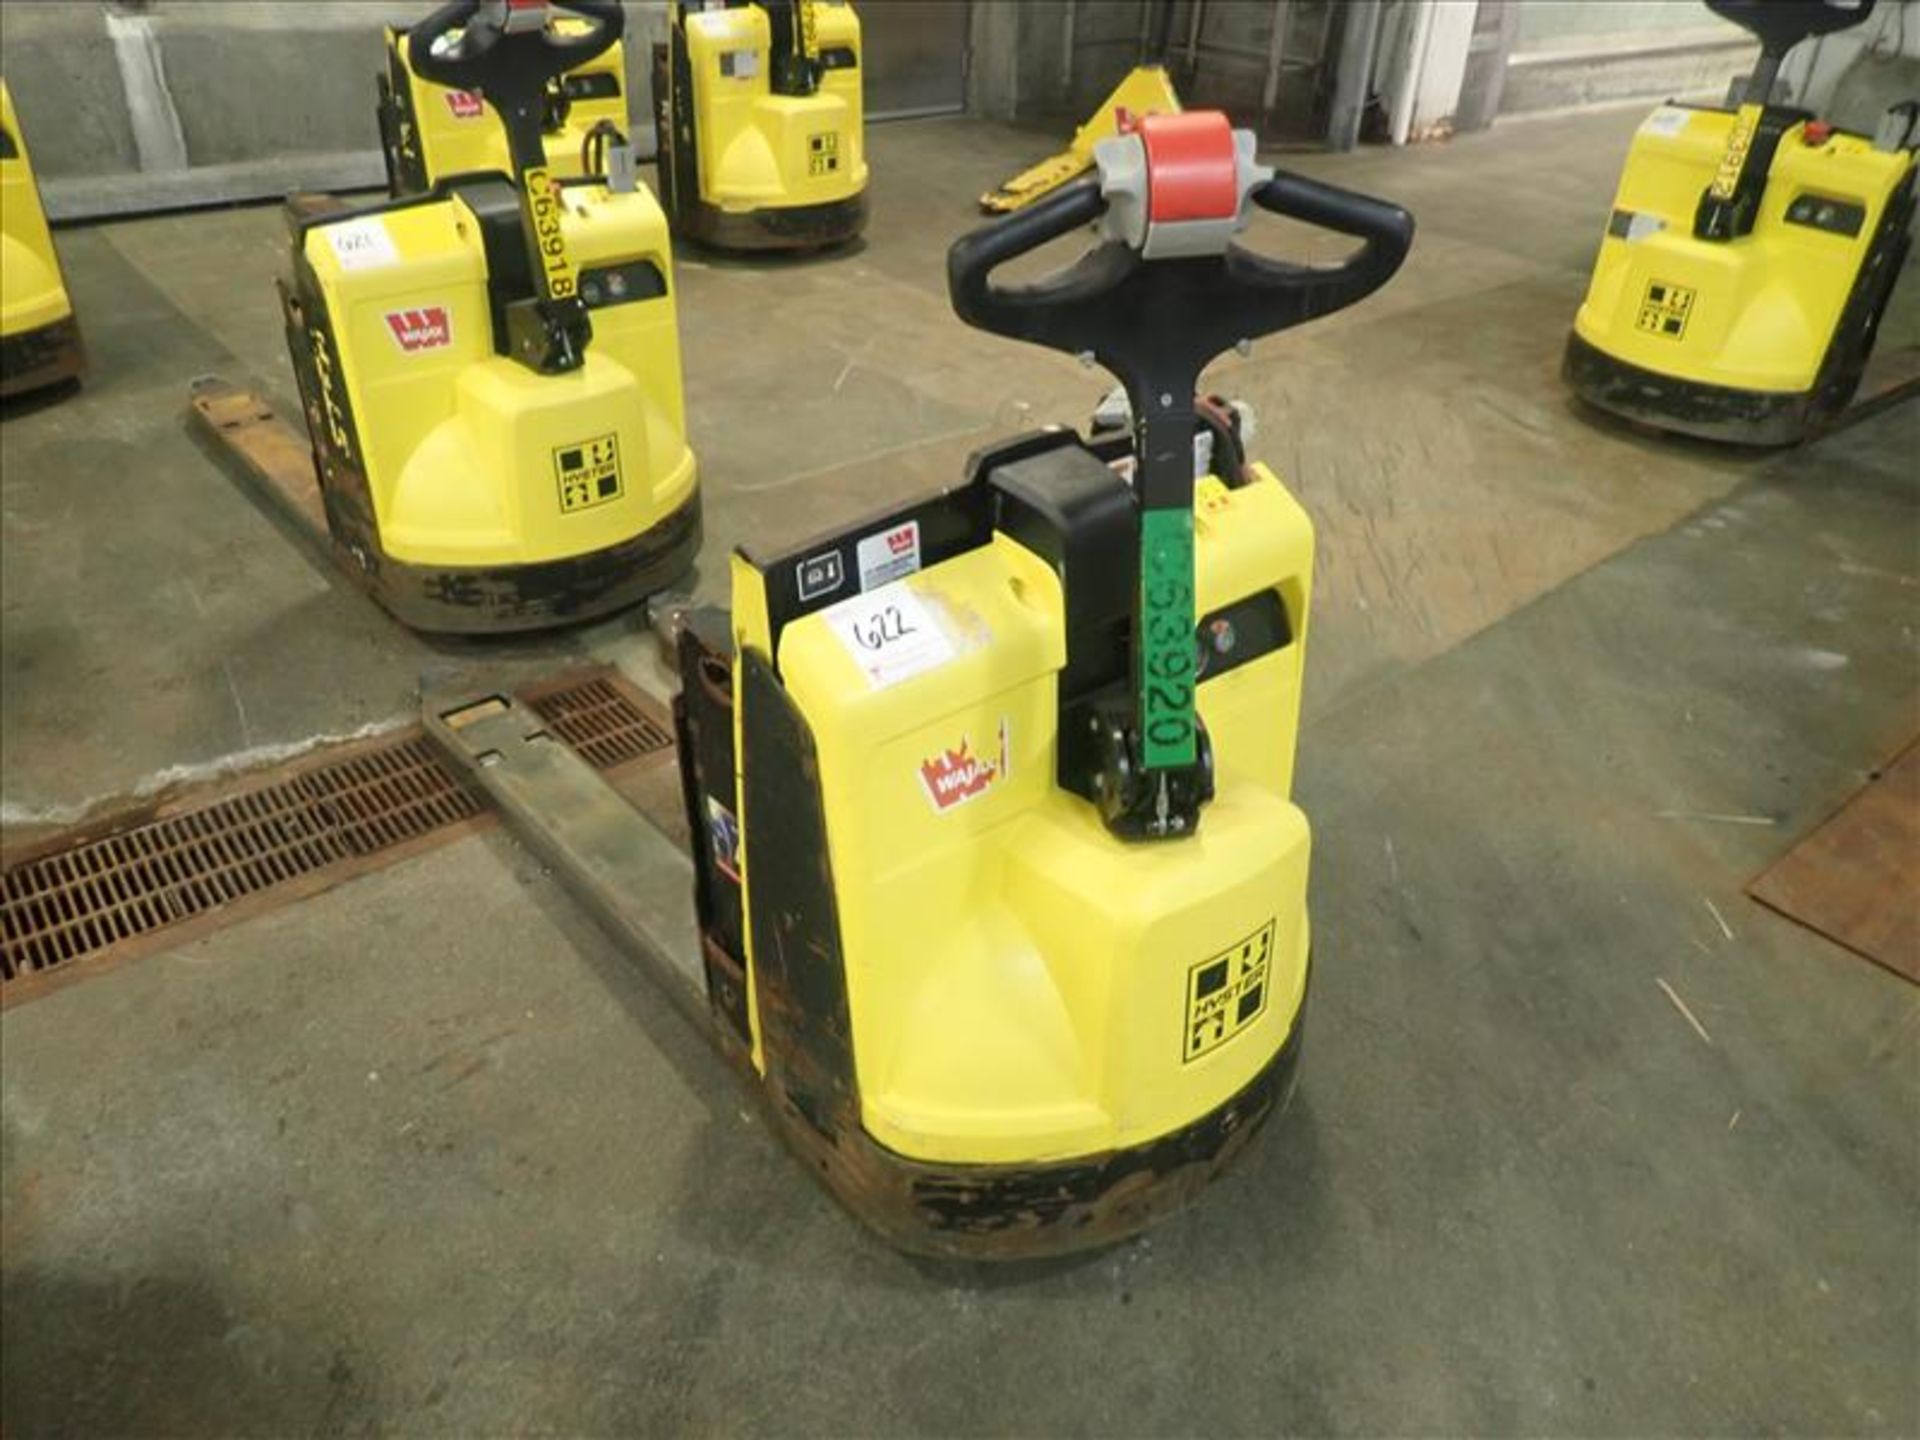 Hyster walk-behind pallet truck, mod. W45ZHD,4500 lbs. cap., 24V (charger sold separately), no.